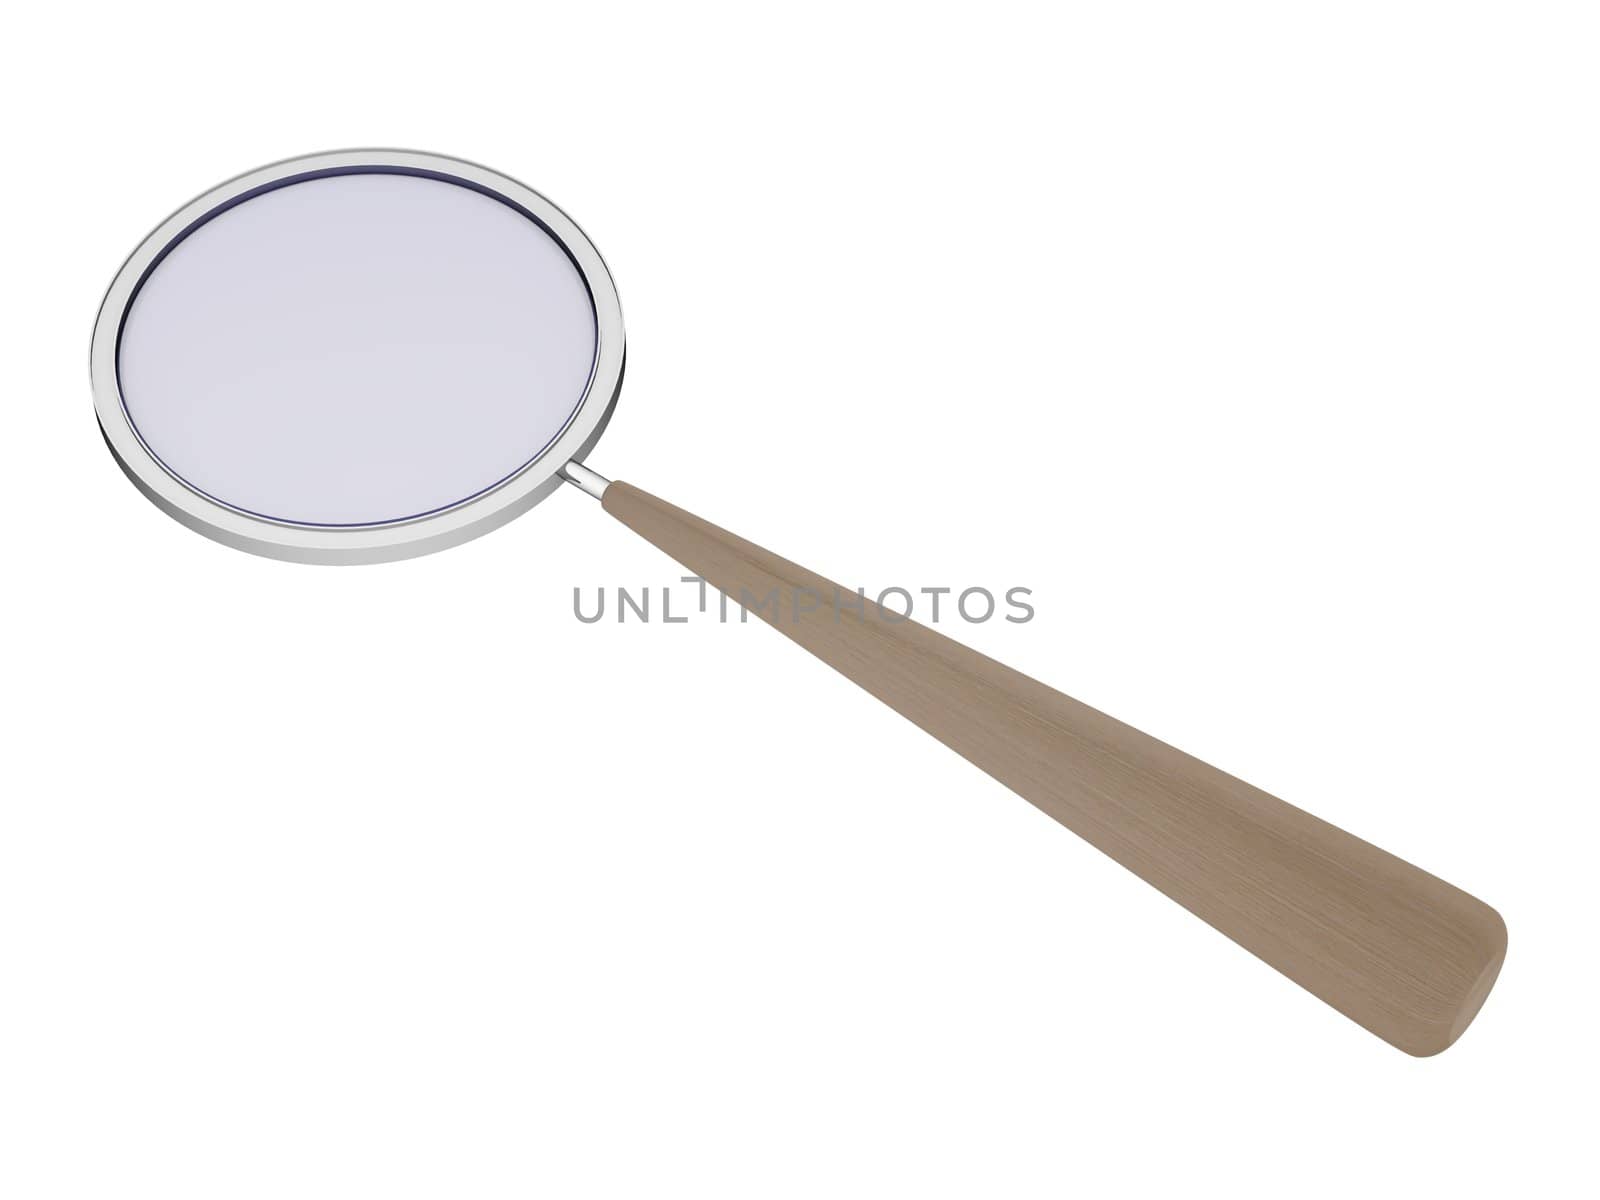 Loupe. Magnifying glass. Isolated tool. 3D image.